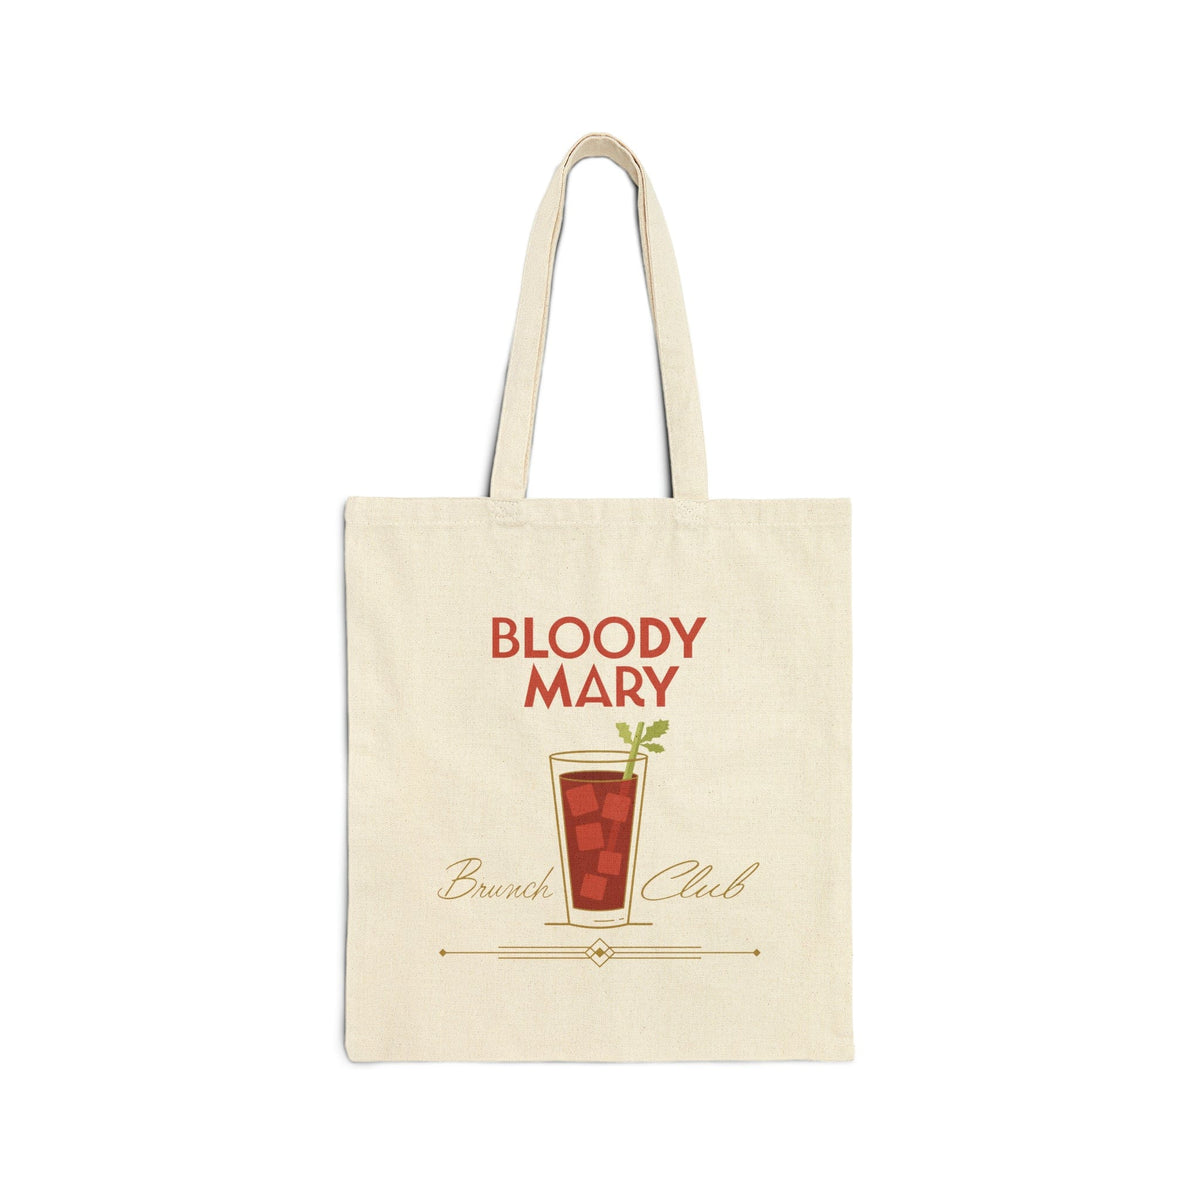 Bloody Mary Brunch Club Canvas Tote Bag | Girls Day | Party Favors | Brunching so hard Bags TheFringeCultureCollective